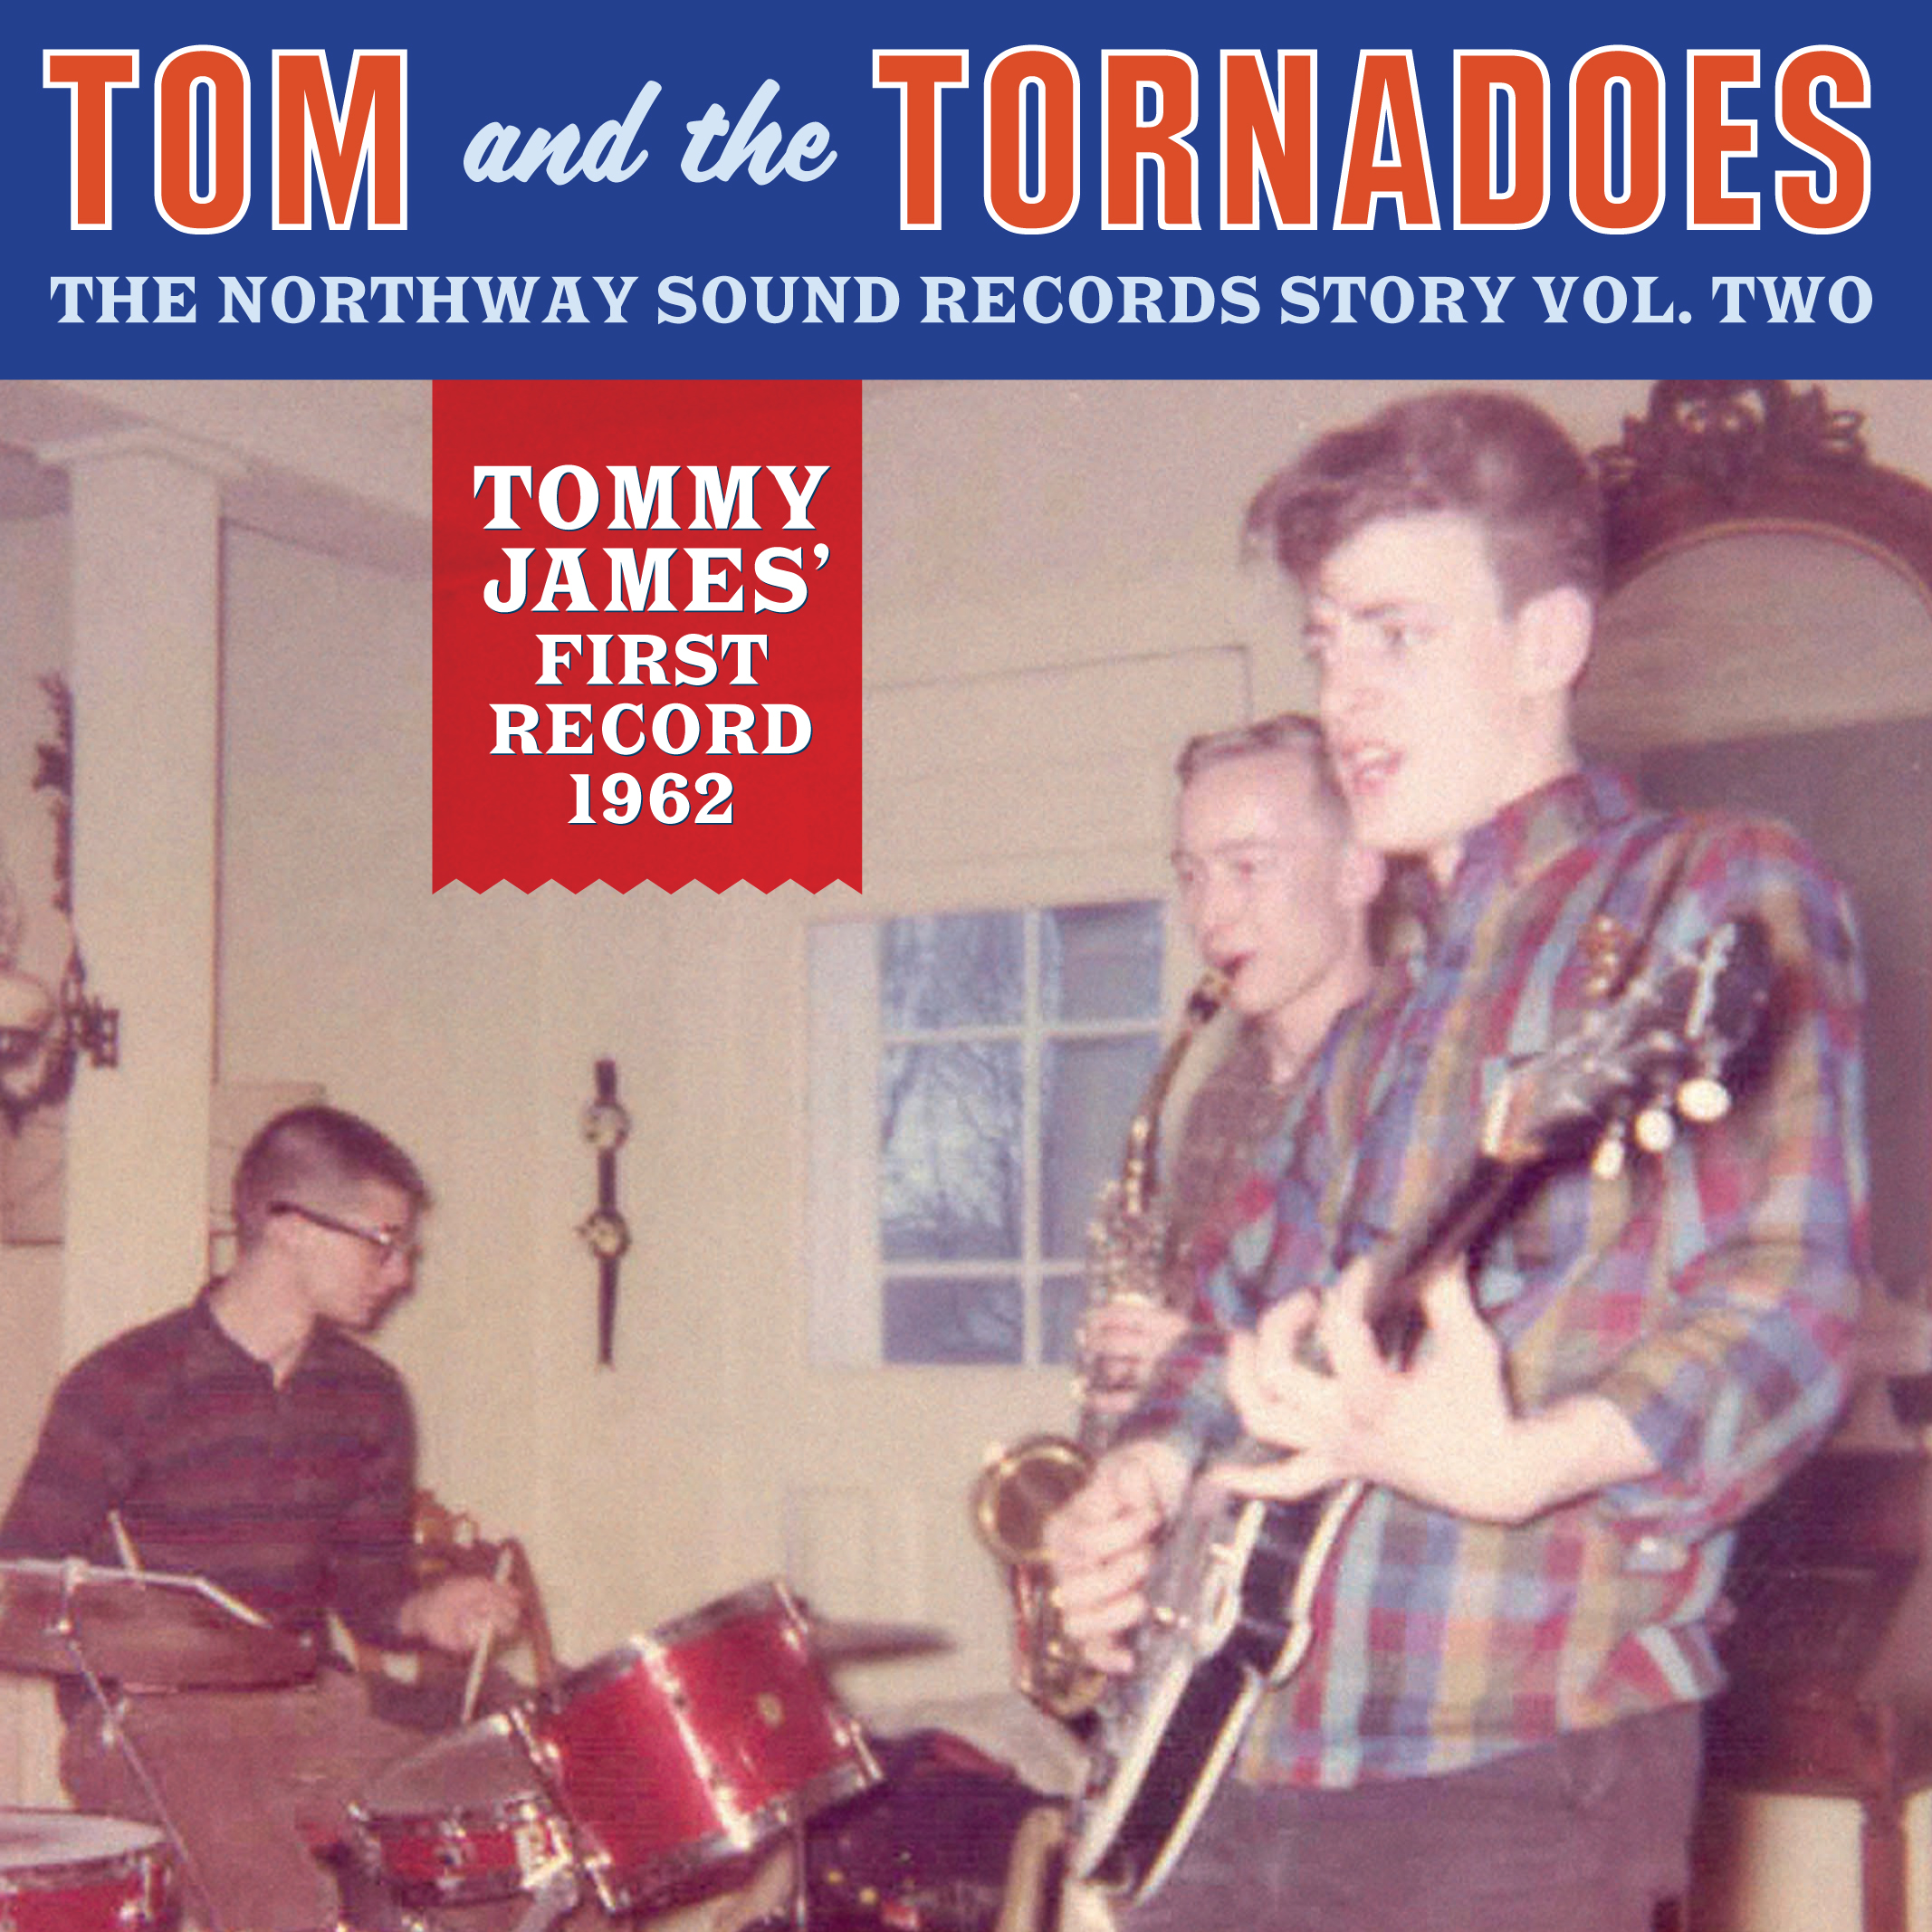 Tom and the Tornadoes 45 sleeve